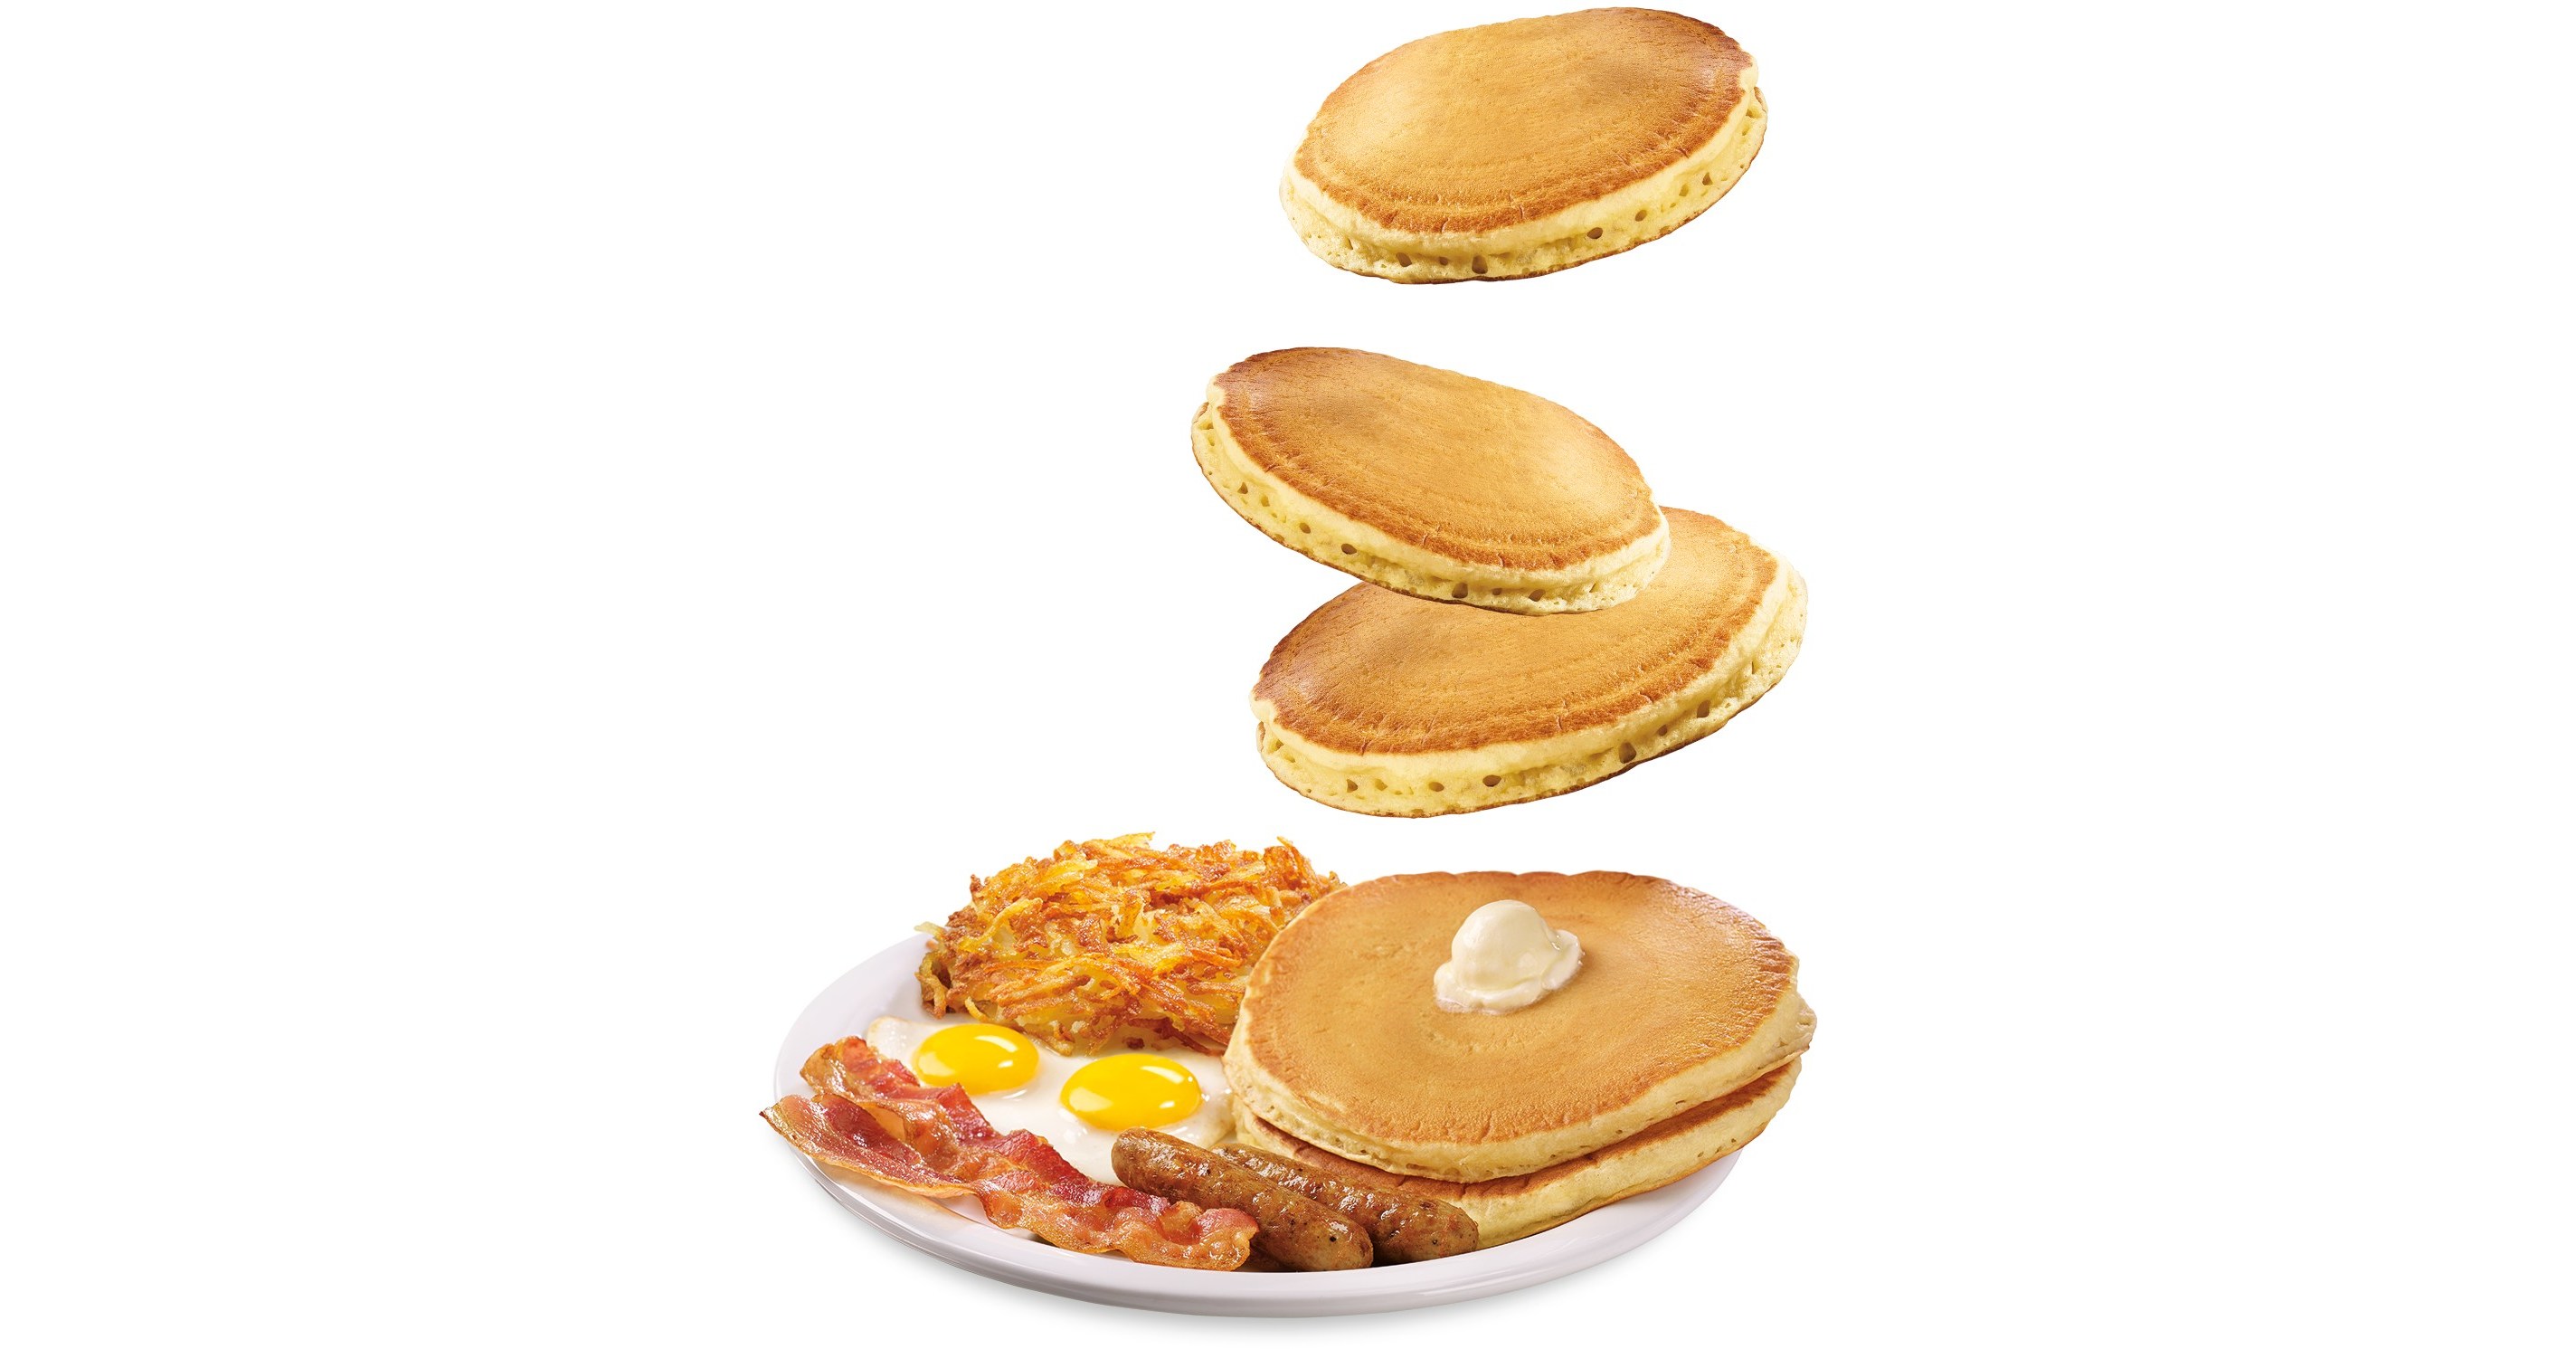 Denny's brings back its world famous menu item - the 'super' $8 meal to  celebrate 70 years